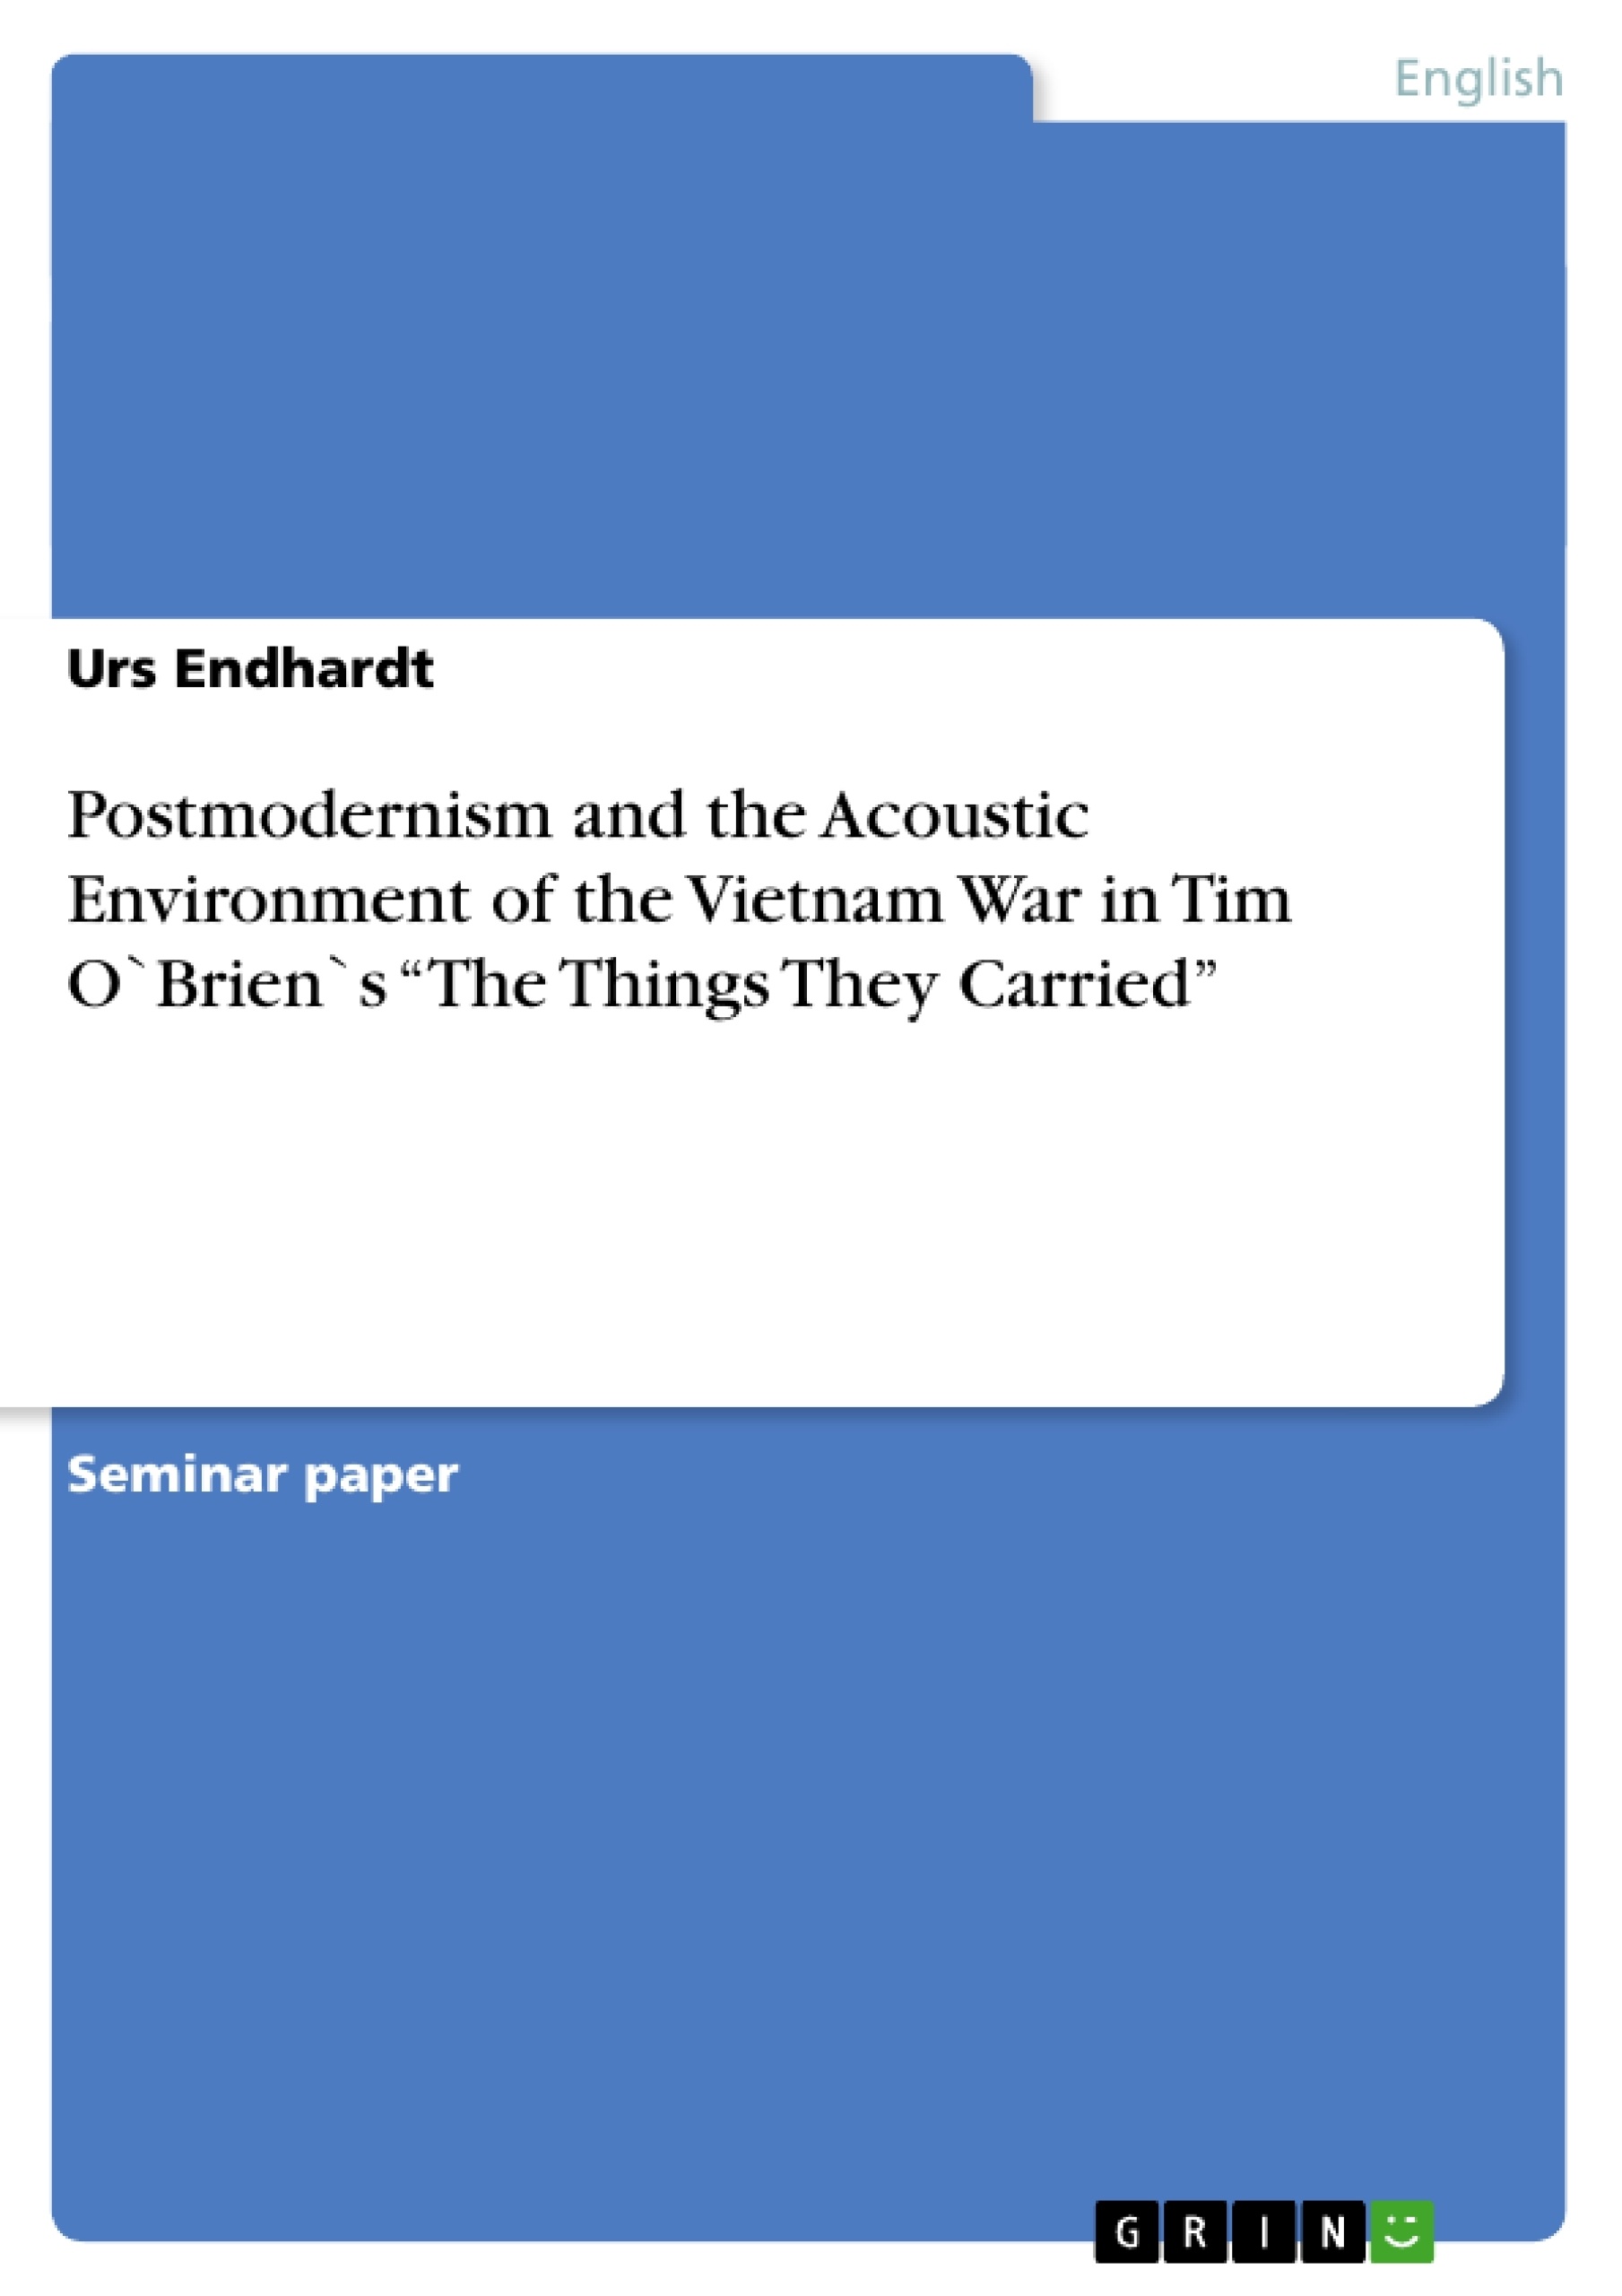 Title: Postmodernism and the Acoustic Environment  of the Vietnam War in Tim O`Brien`s  “The Things They Carried”